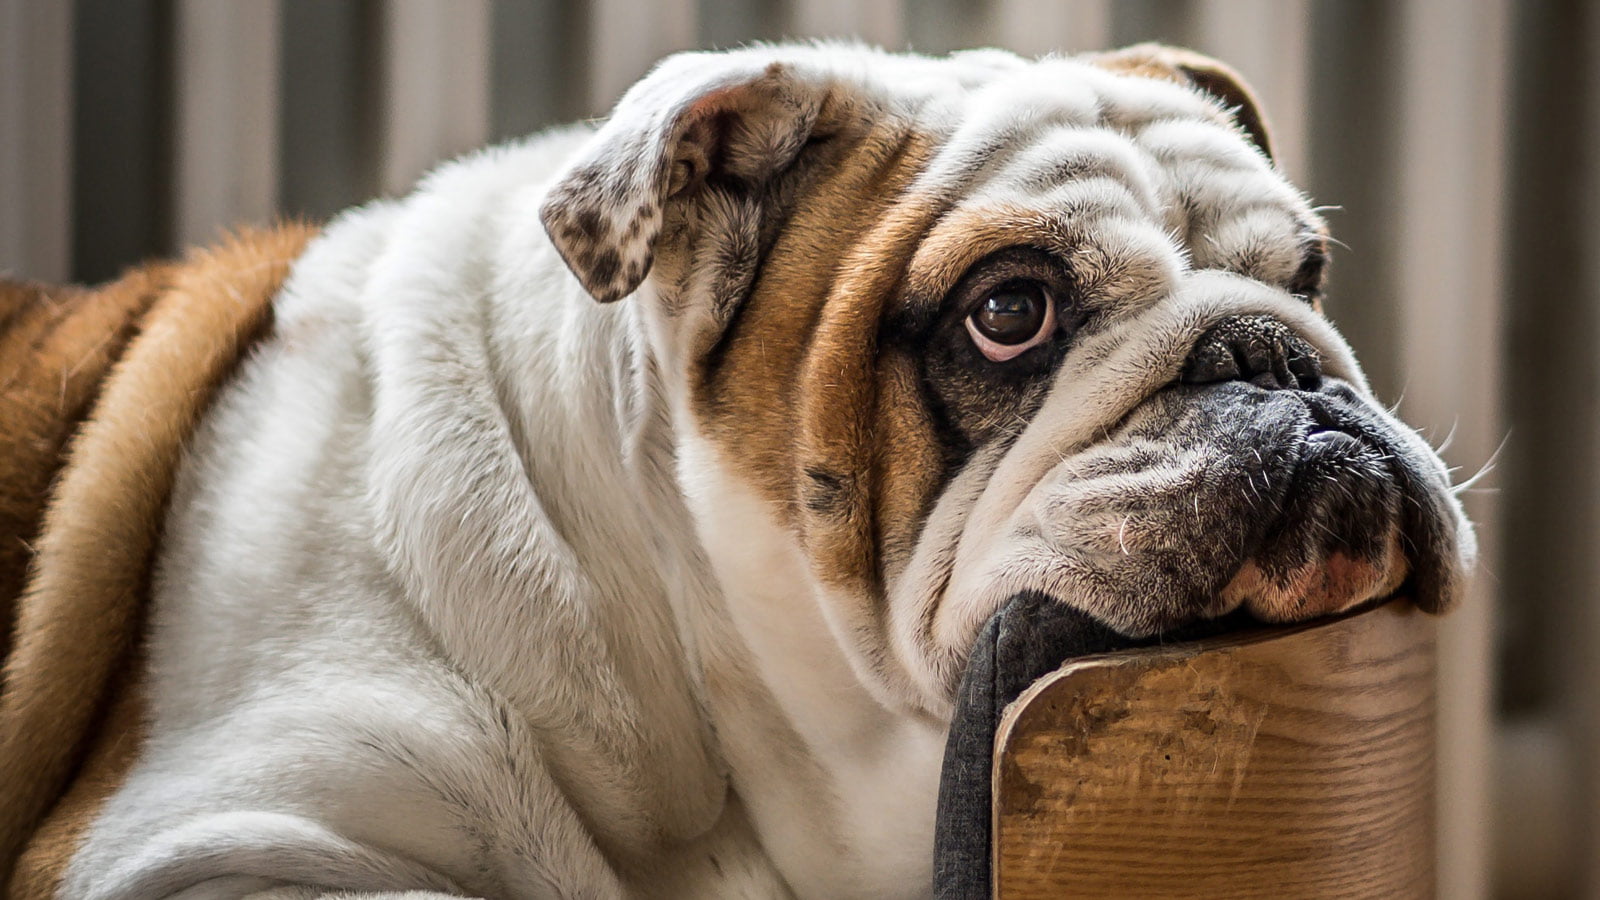 Is your dog overweight?